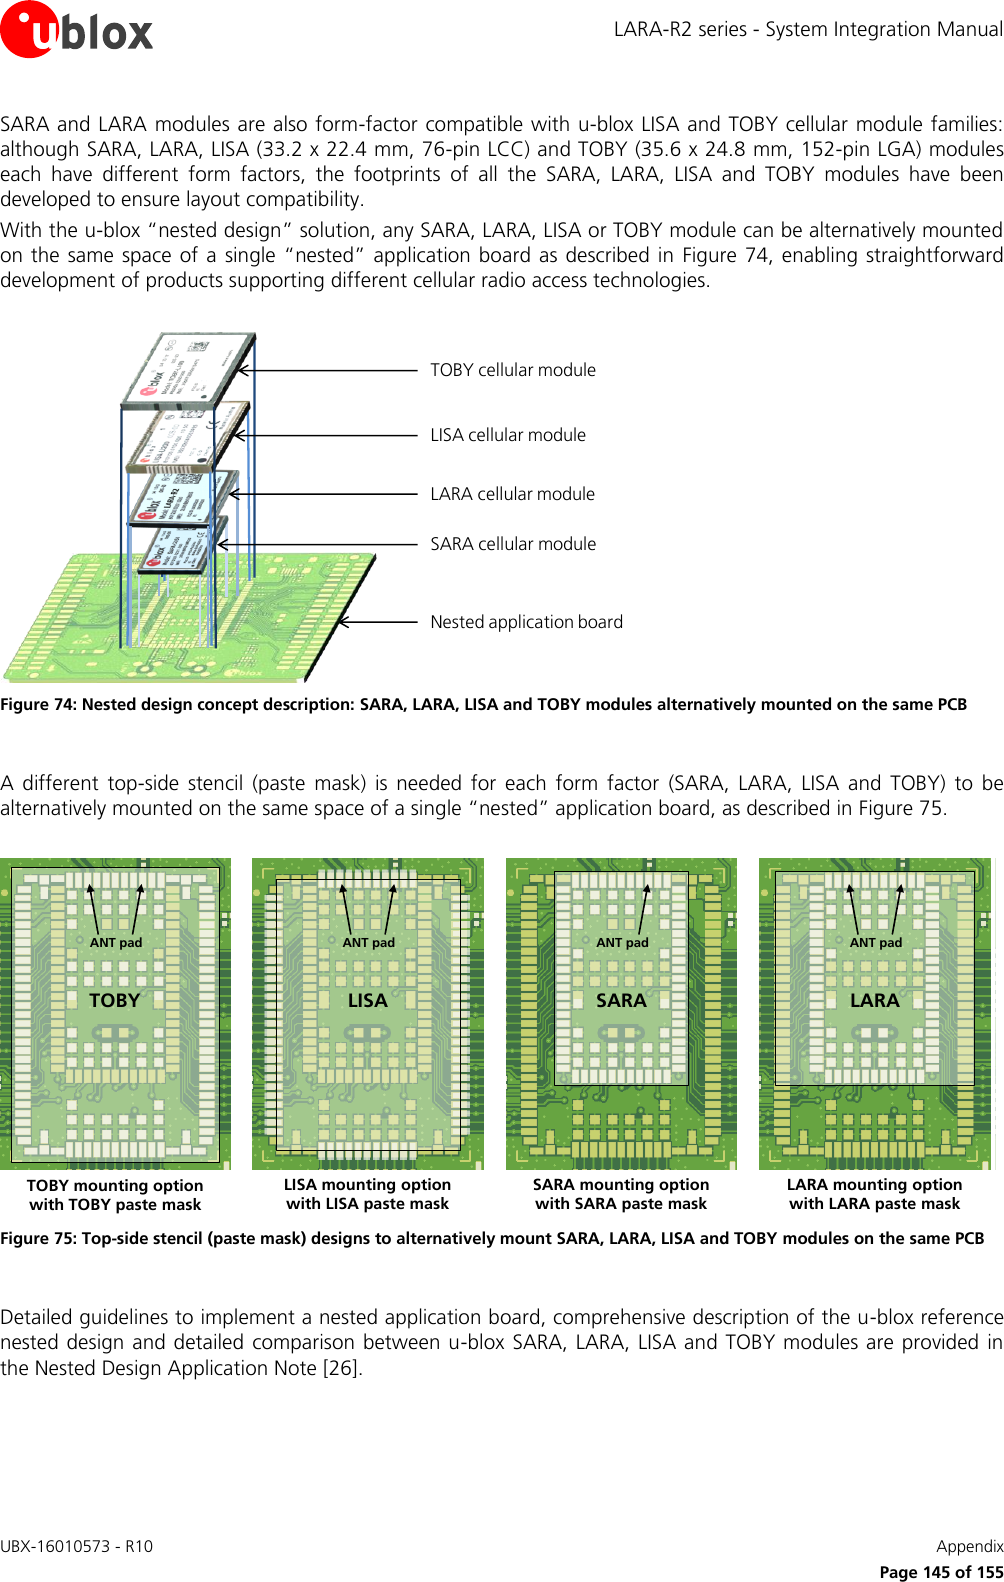 LARA-R2 series - System Integration Manual UBX-16010573 - R10    Appendix      Page 145 of 155 SARA and LARA modules are also form-factor compatible with u-blox LISA and TOBY cellular module families: although SARA, LARA, LISA (33.2 x 22.4 mm, 76-pin LCC) and TOBY (35.6 x 24.8 mm, 152-pin LGA) modules each  have  different  form  factors,  the  footprints  of  all  the  SARA,  LARA,  LISA  and  TOBY  modules  have  been developed to ensure layout compatibility. With the u-blox “nested design” solution, any SARA, LARA, LISA or TOBY module can be alternatively mounted on the same space  of  a single “nested”  application board as described  in  Figure 74, enabling  straightforward development of products supporting different cellular radio access technologies.  LISA cellular moduleLARA cellular moduleSARA cellular moduleNested application boardTOBY cellular module Figure 74: Nested design concept description: SARA, LARA, LISA and TOBY modules alternatively mounted on the same PCB  A  different  top-side  stencil  (paste  mask)  is  needed  for  each  form  factor  (SARA,  LARA,  LISA  and  TOBY)  to  be alternatively mounted on the same space of a single “nested” application board, as described in Figure 75.  LISA mounting optionwith LISA paste maskANT padTOBY mounting optionwith TOBY paste maskANT padSARA mounting optionwith SARA paste maskANT pad ANT padLARA mounting optionwith LARA paste maskLISATOBY SARA LARA Figure 75: Top-side stencil (paste mask) designs to alternatively mount SARA, LARA, LISA and TOBY modules on the same PCB  Detailed guidelines to implement a nested application board, comprehensive description of the u-blox reference nested design and detailed  comparison between u-blox SARA, LARA, LISA and TOBY modules are provided  in the Nested Design Application Note [26].   